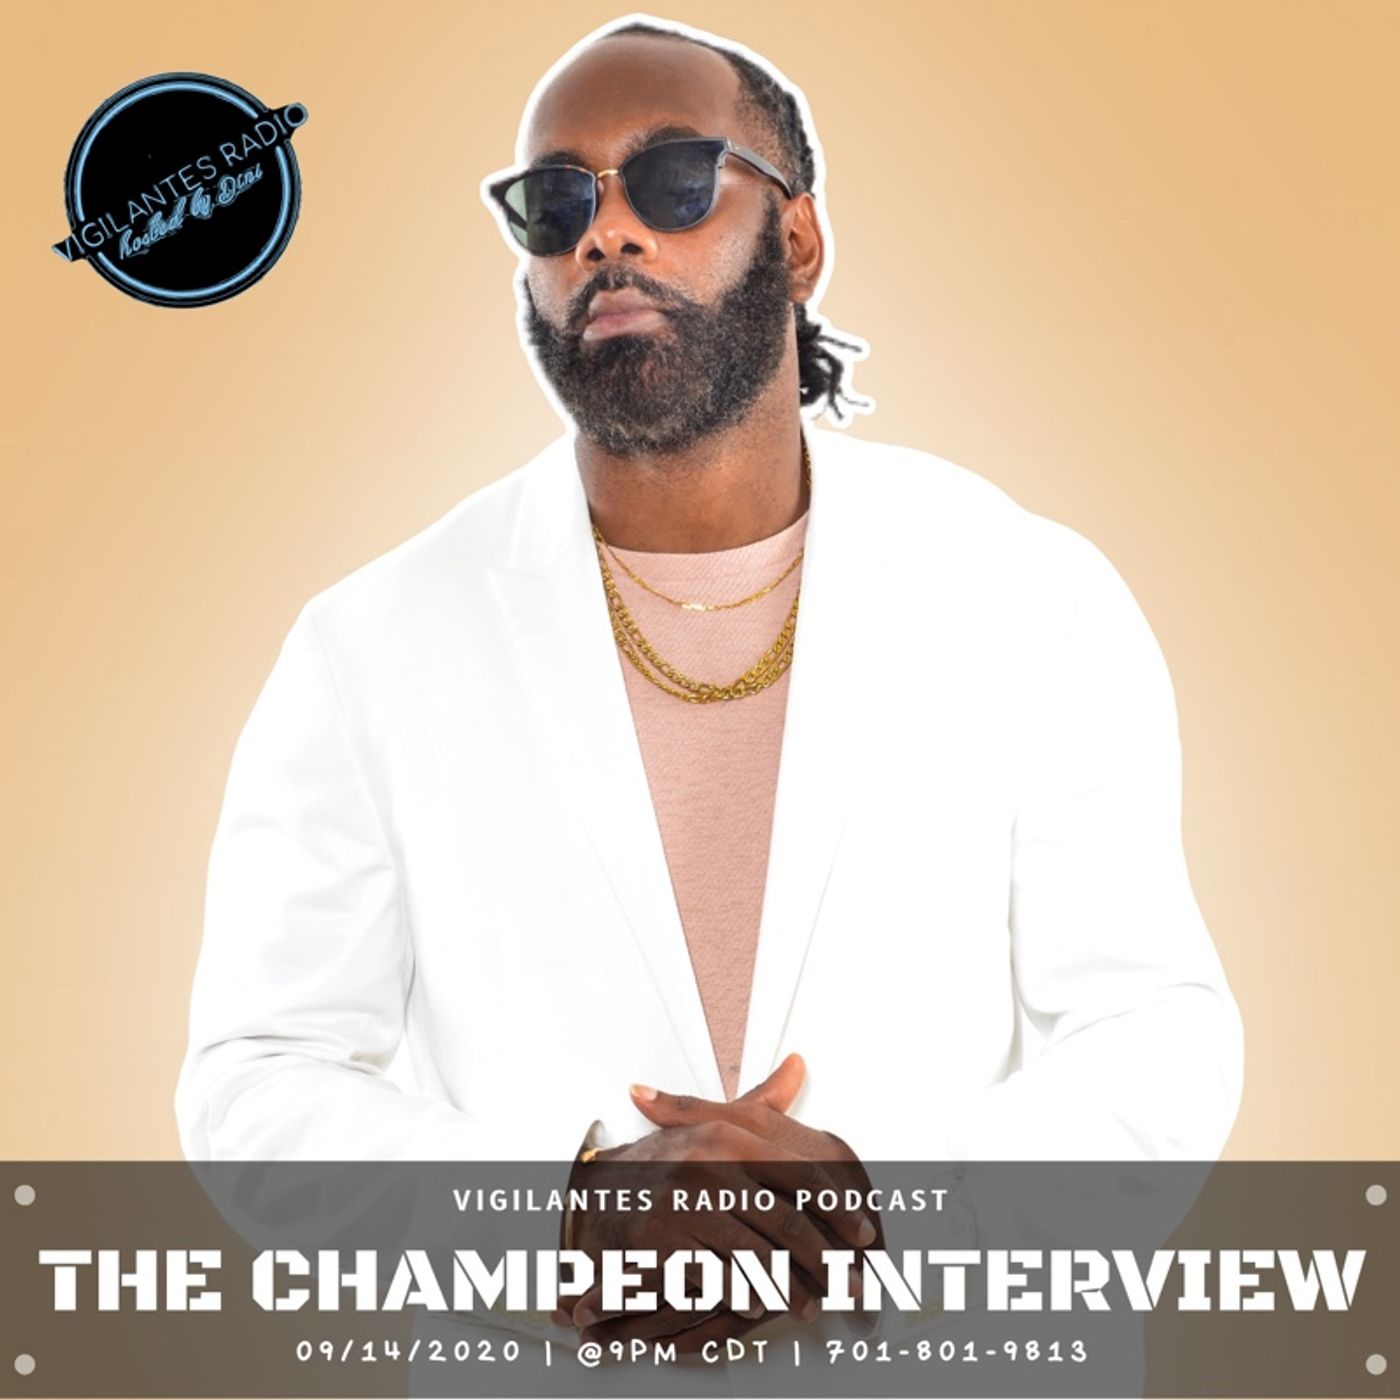 The Champeon Interview. Image